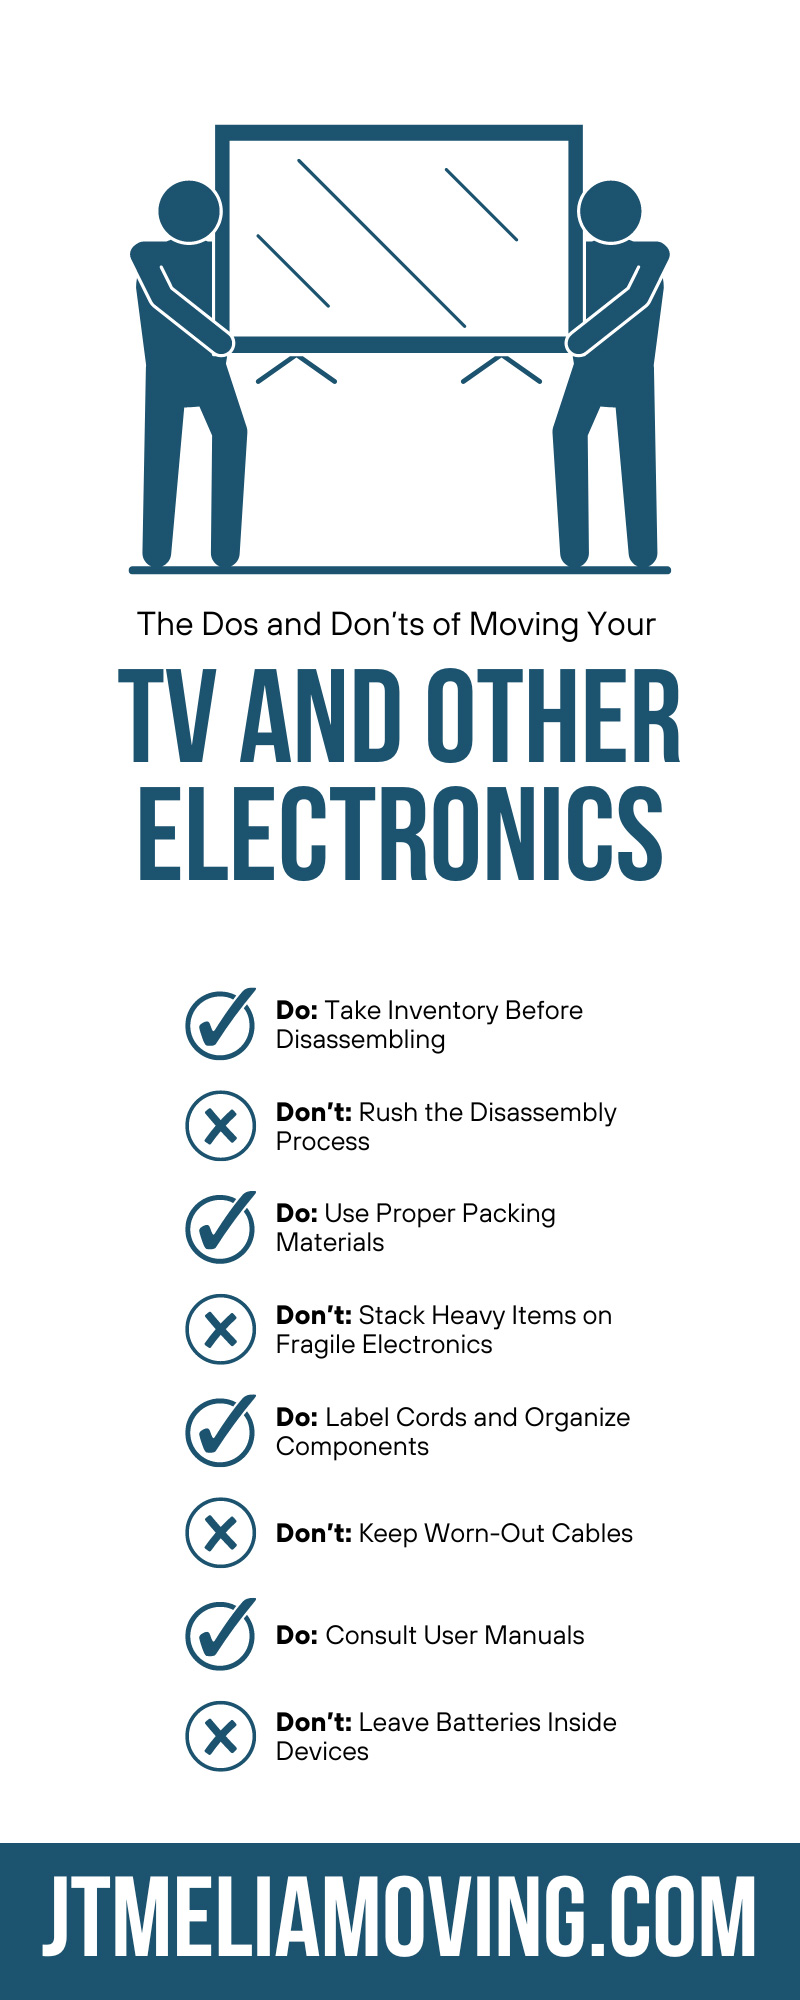 The Dos and Don’ts of Moving Your TV and Other Electronics